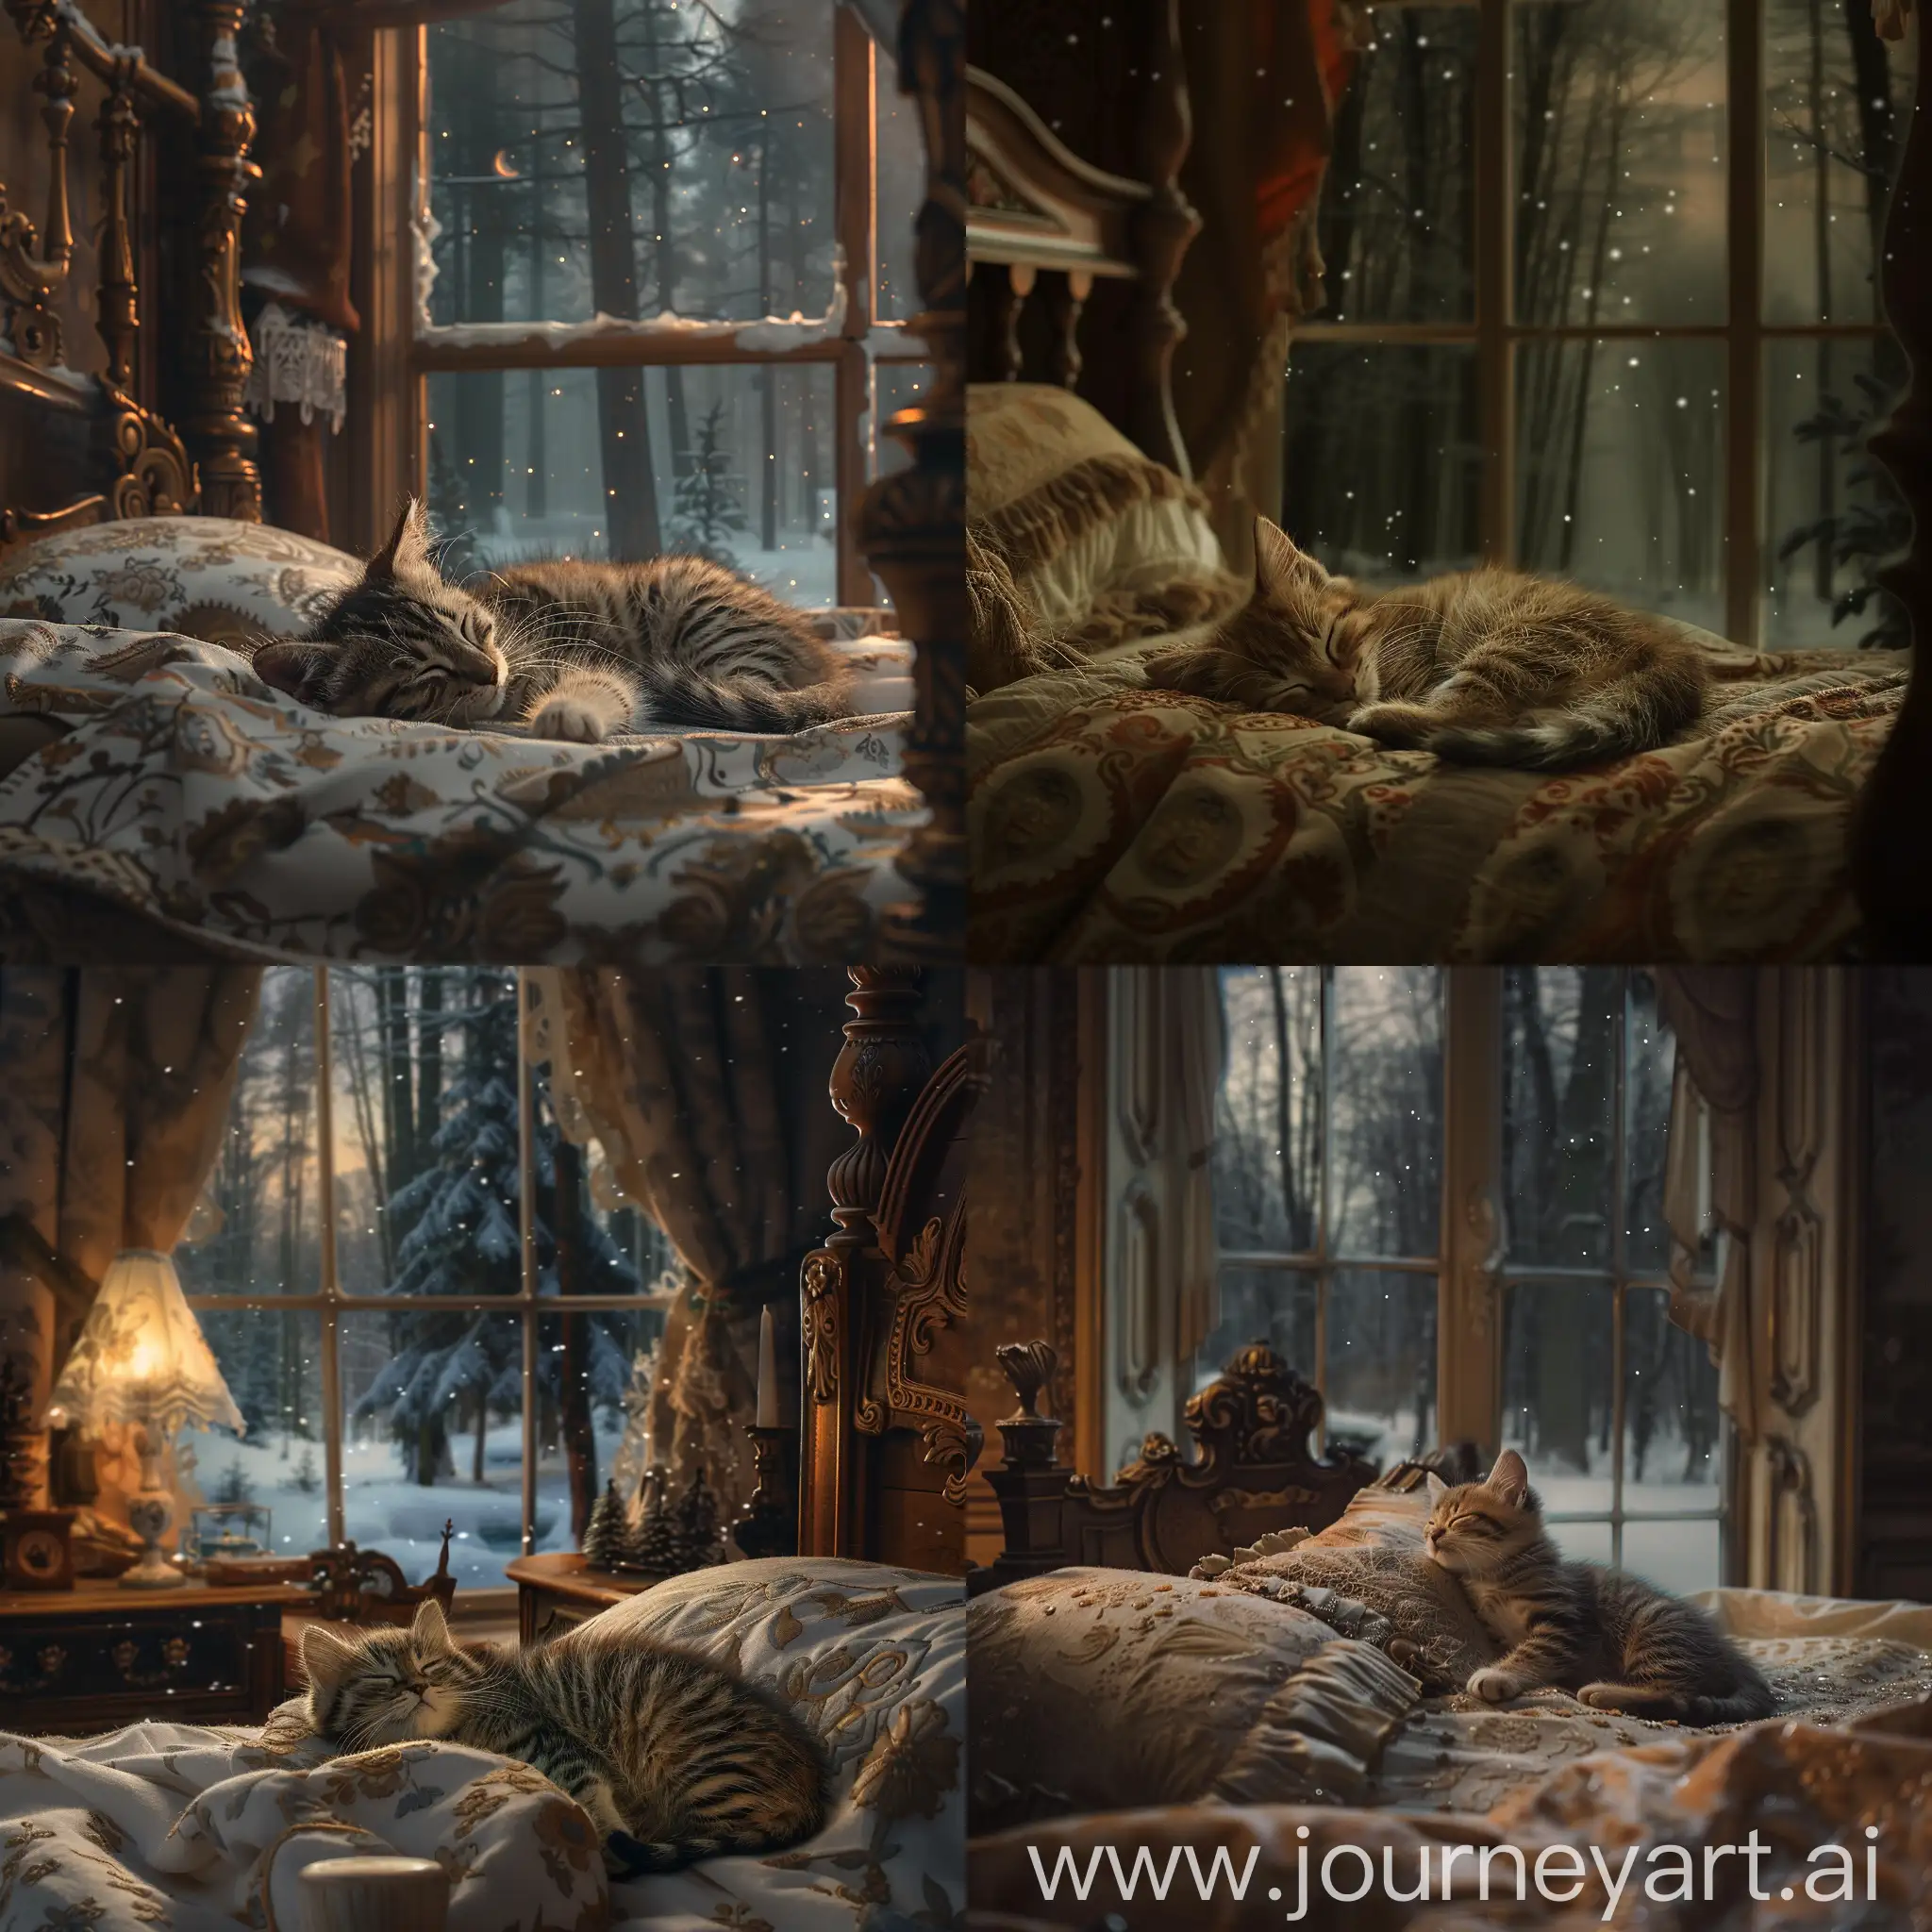 Cozy-Winter-Night-Antique-Furniture-and-a-Sleeping-Kitten